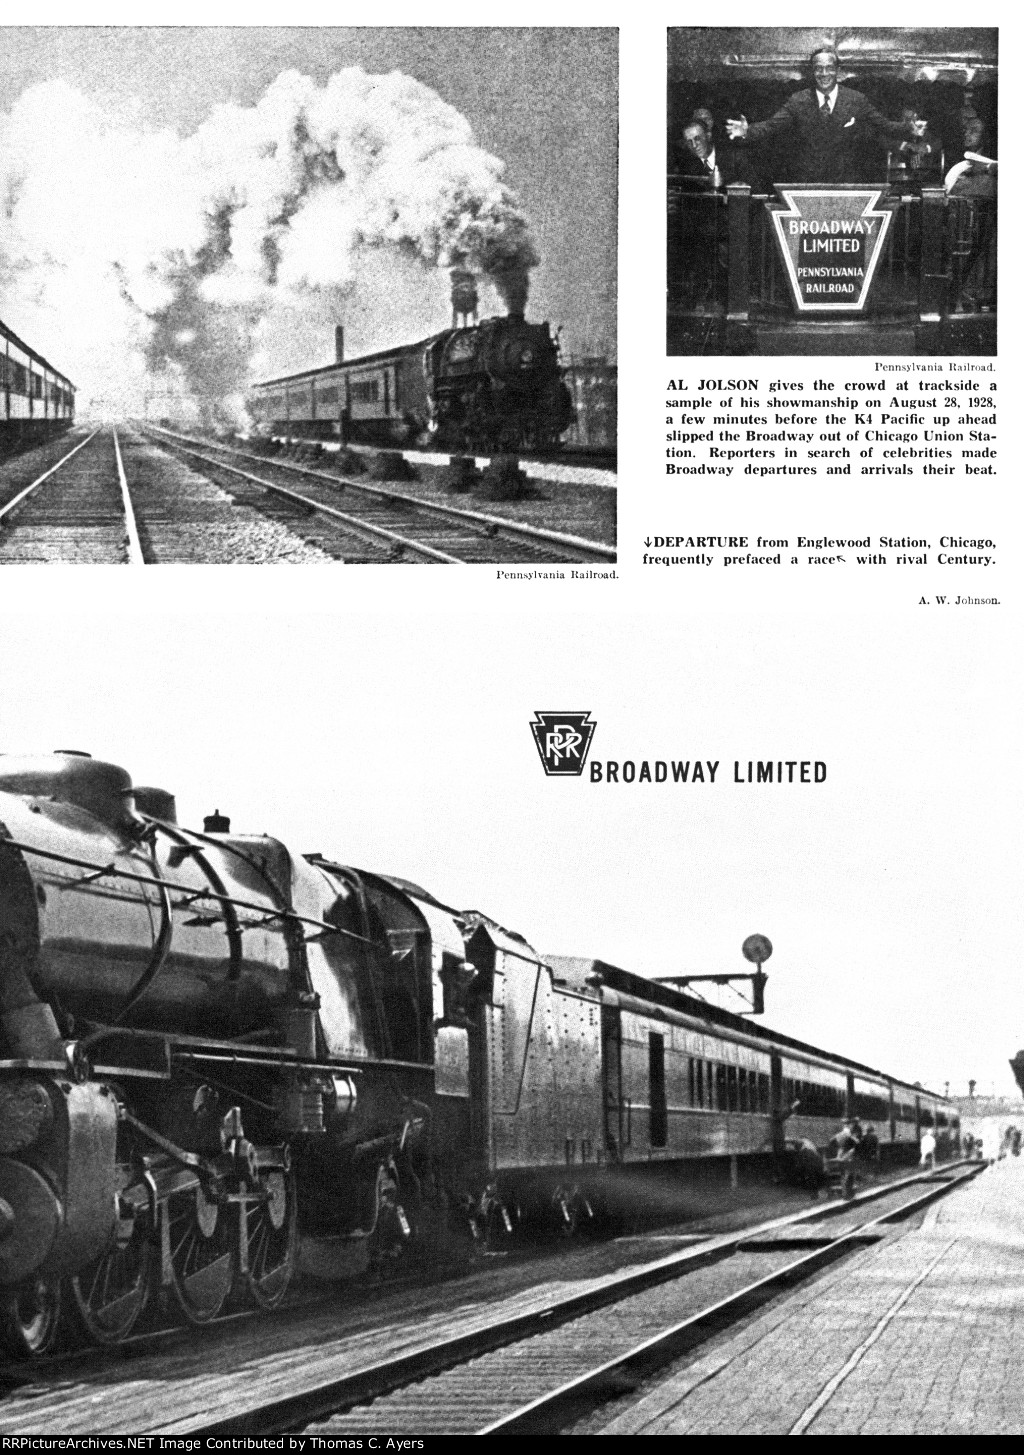 "The Broadway Limited," Page 27, 1962